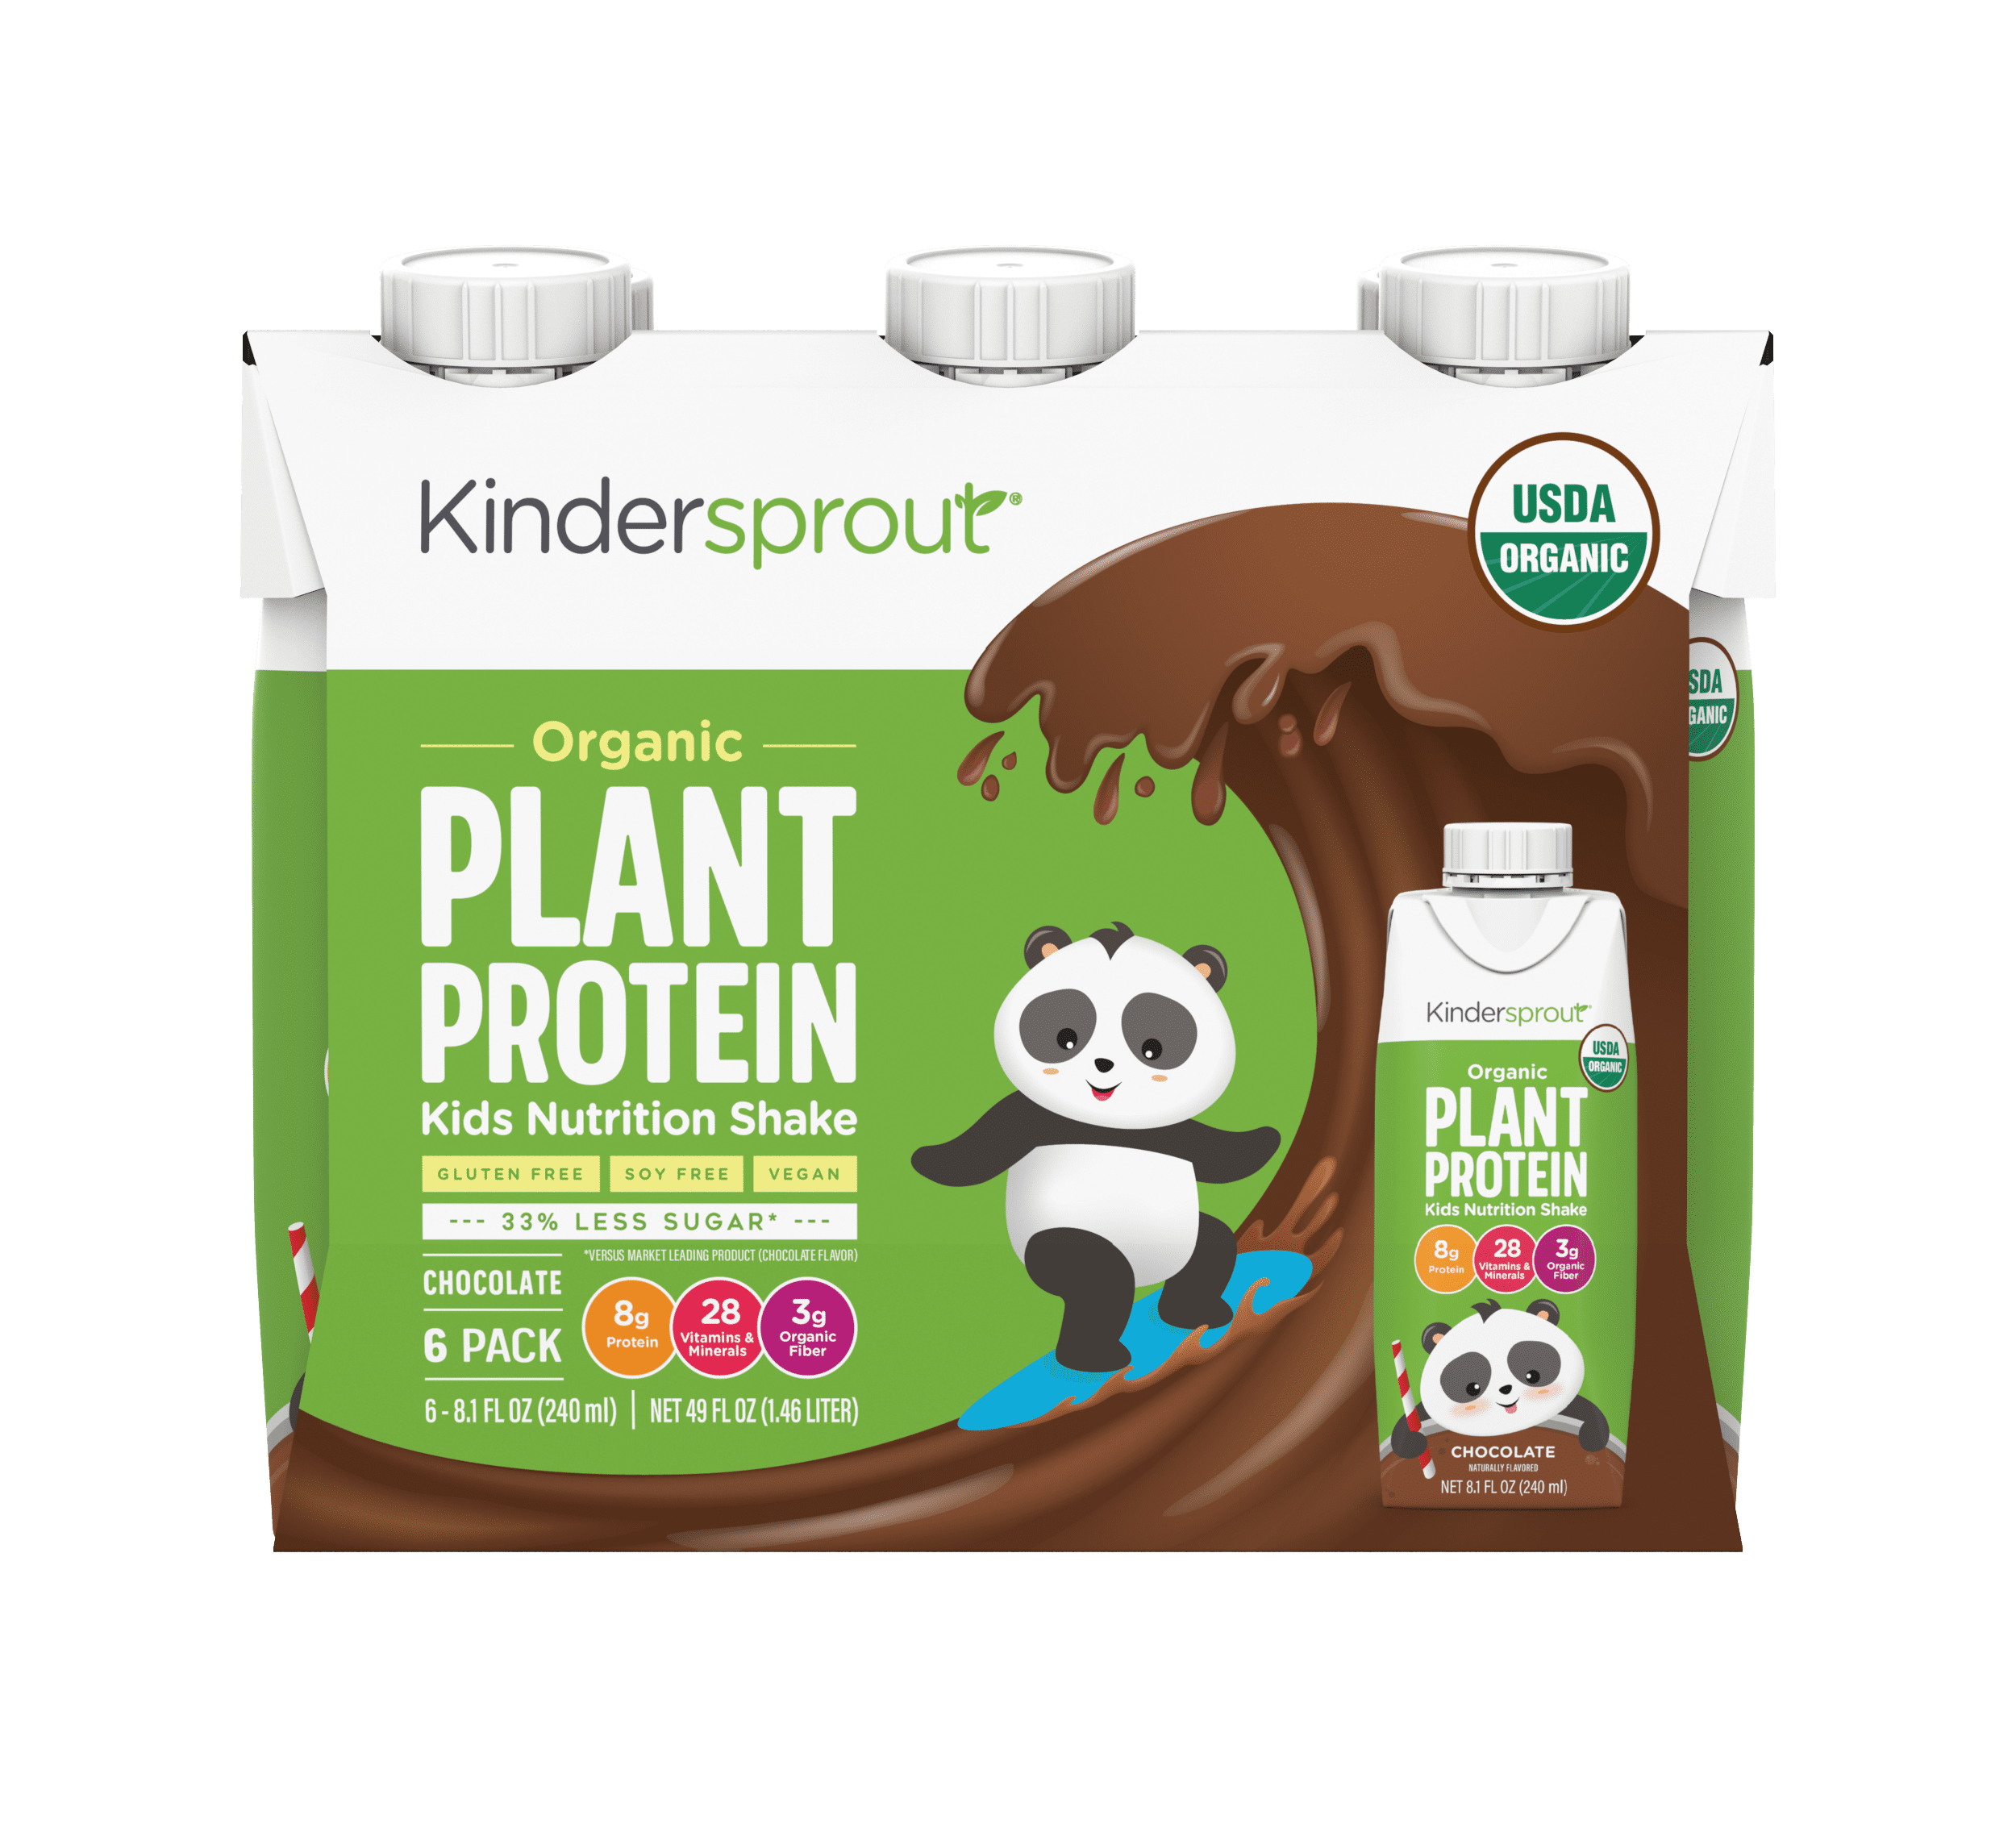 Kindersprout Kids Nutrition Shake, Organic, Plant Protein, Chocolate, 6 Pack - 6 pack, 8.1 fl oz